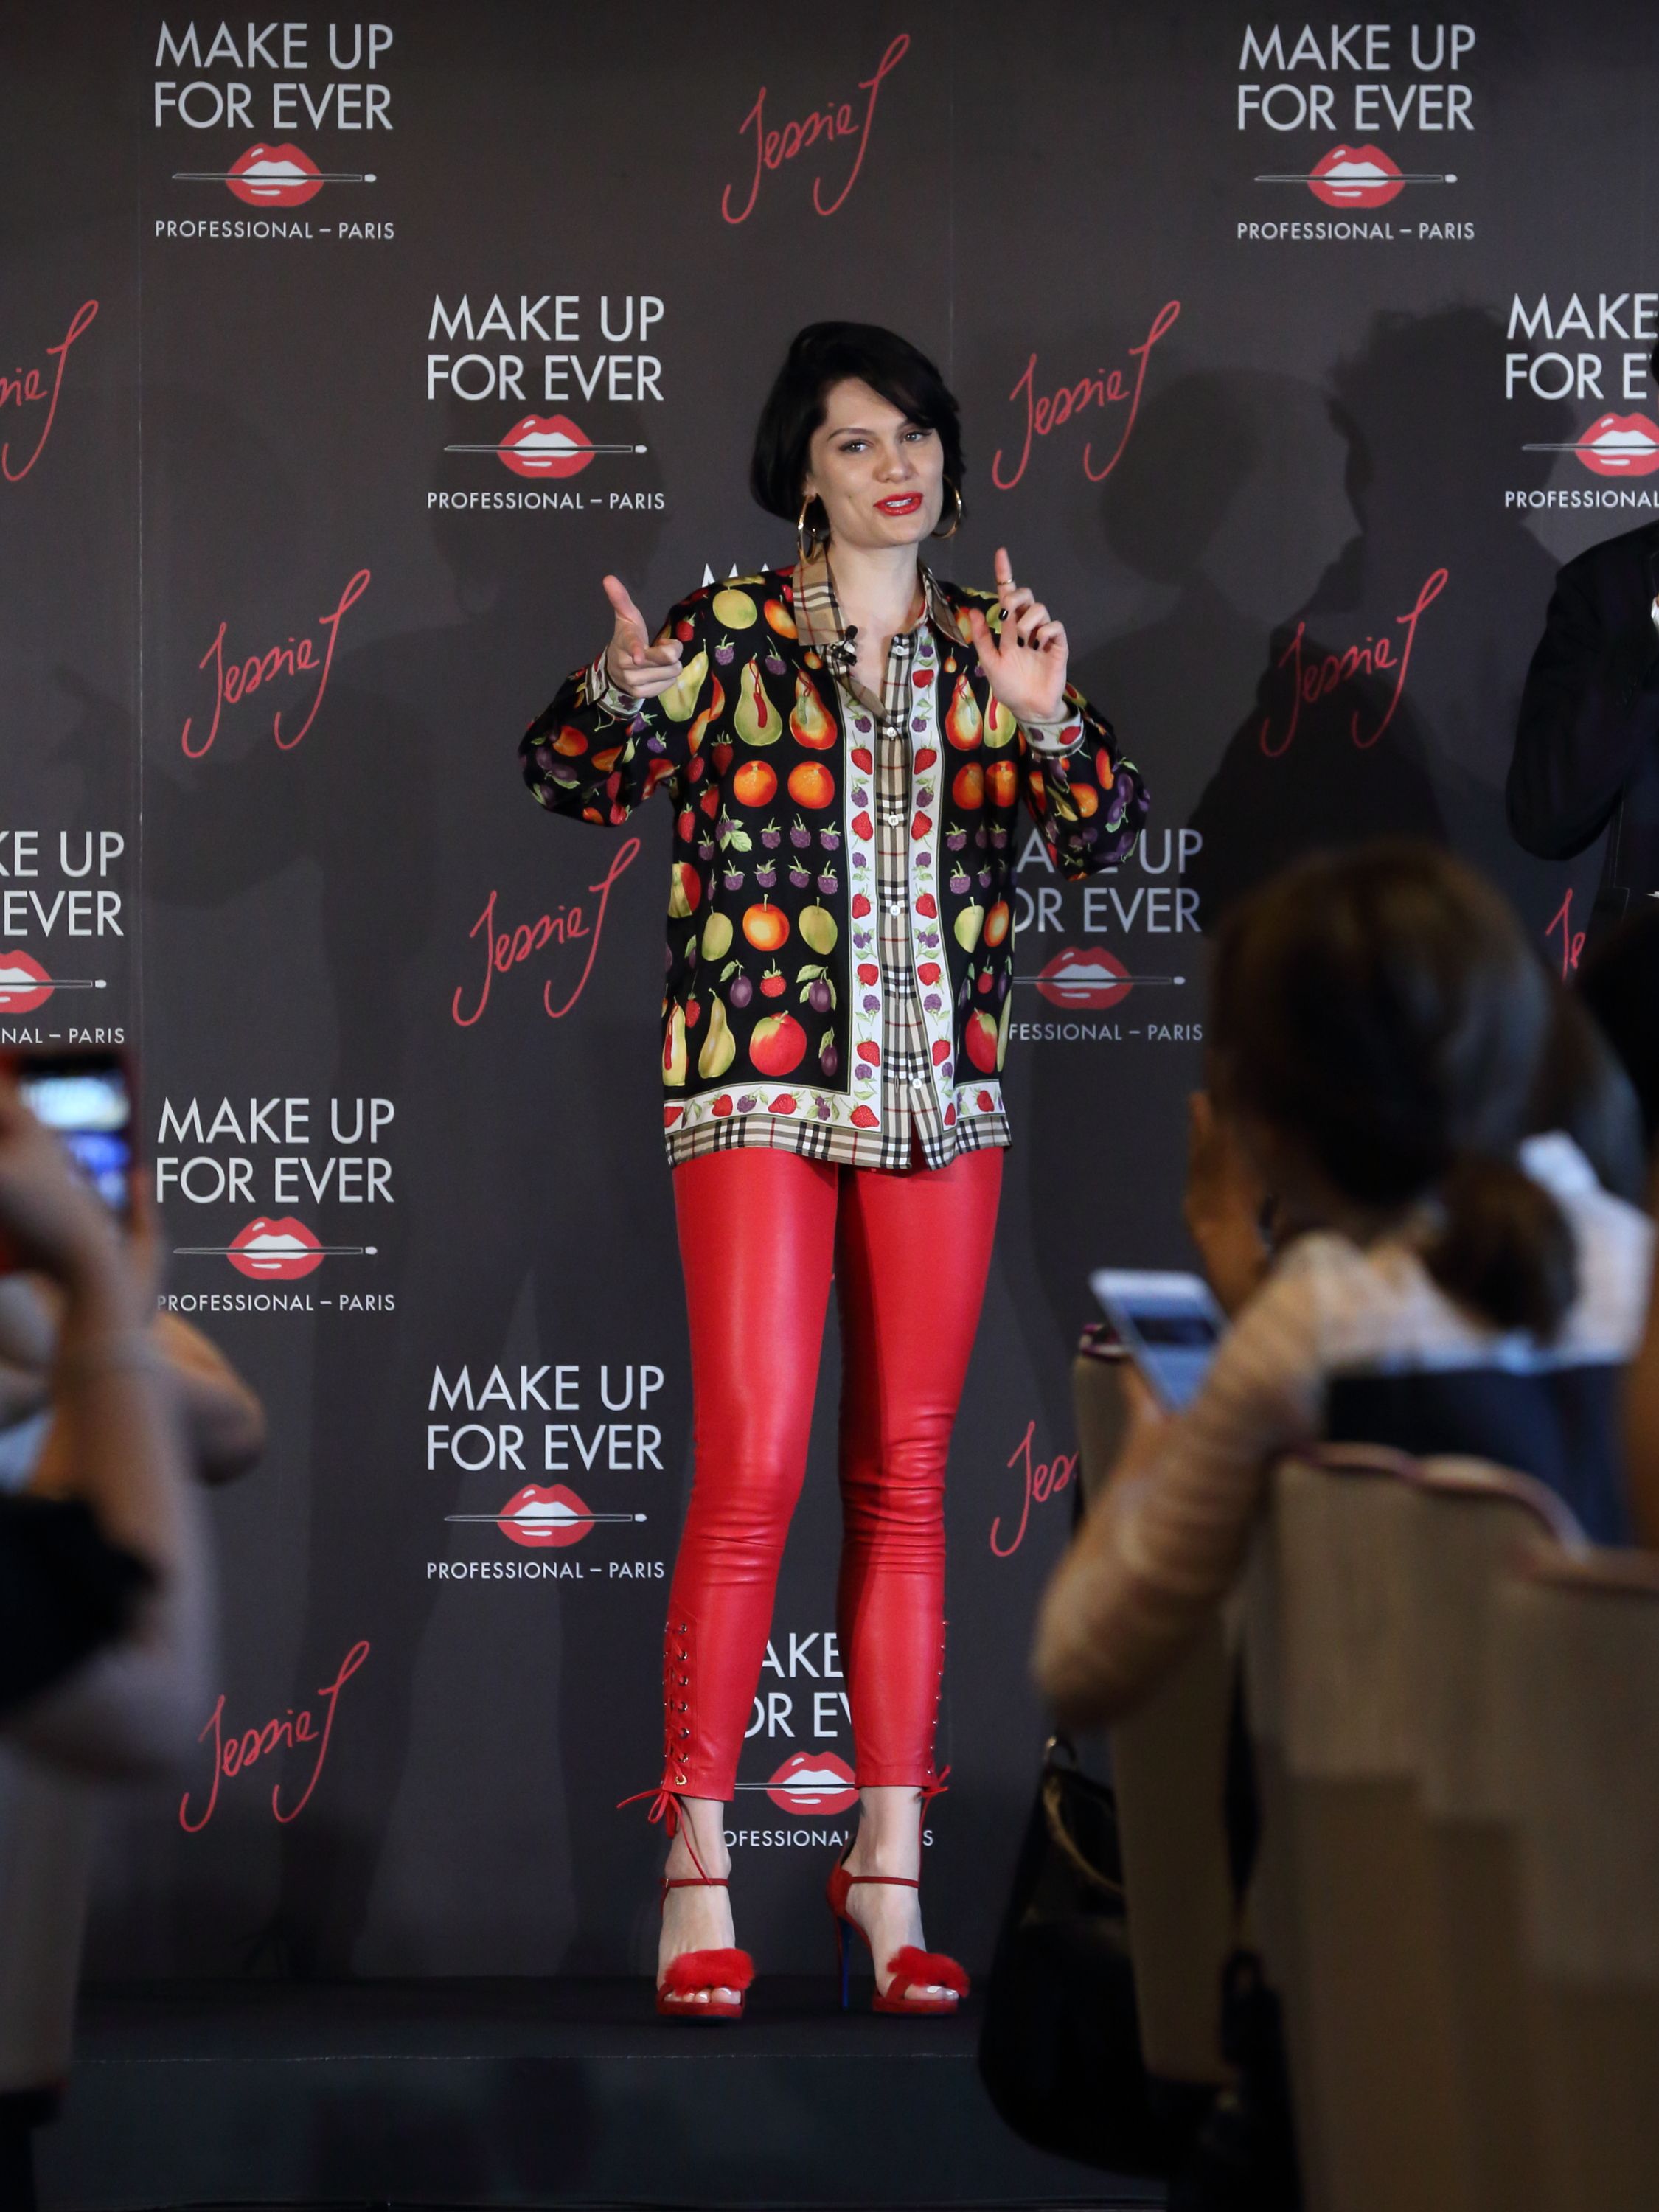 Jessie J attends a photo call and press conference